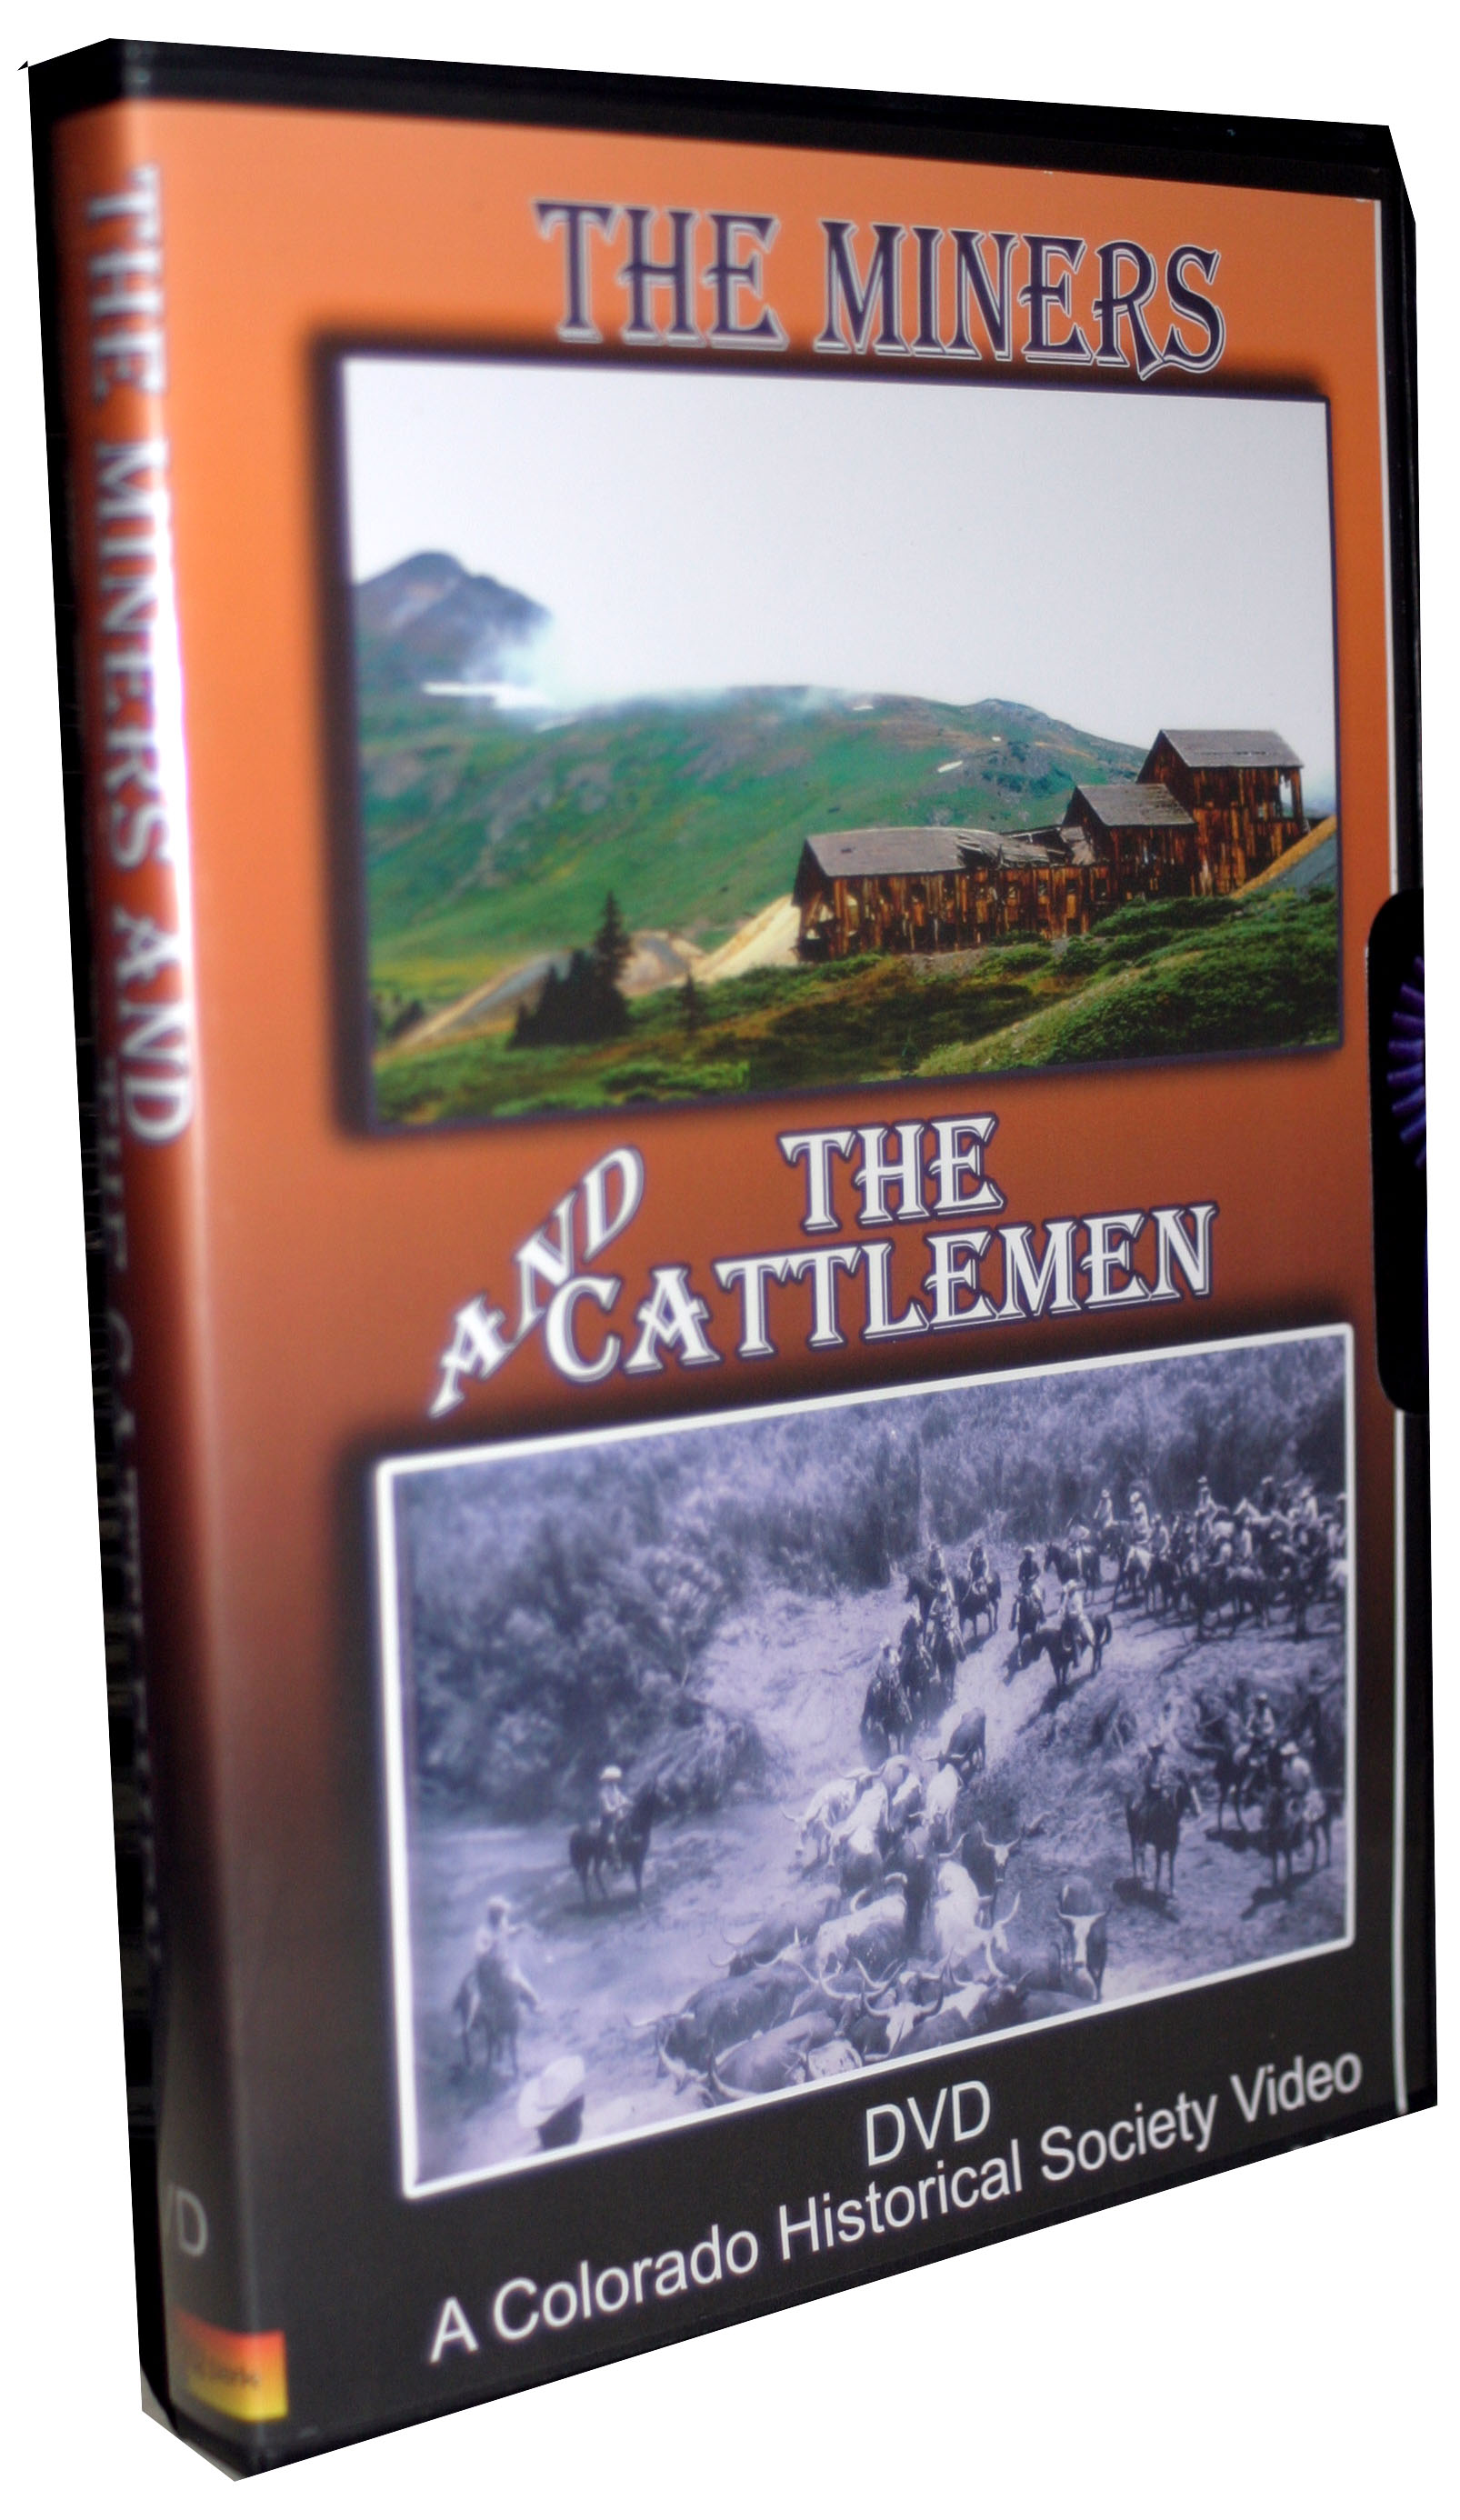 The Cattlemen<BR>
The Minners